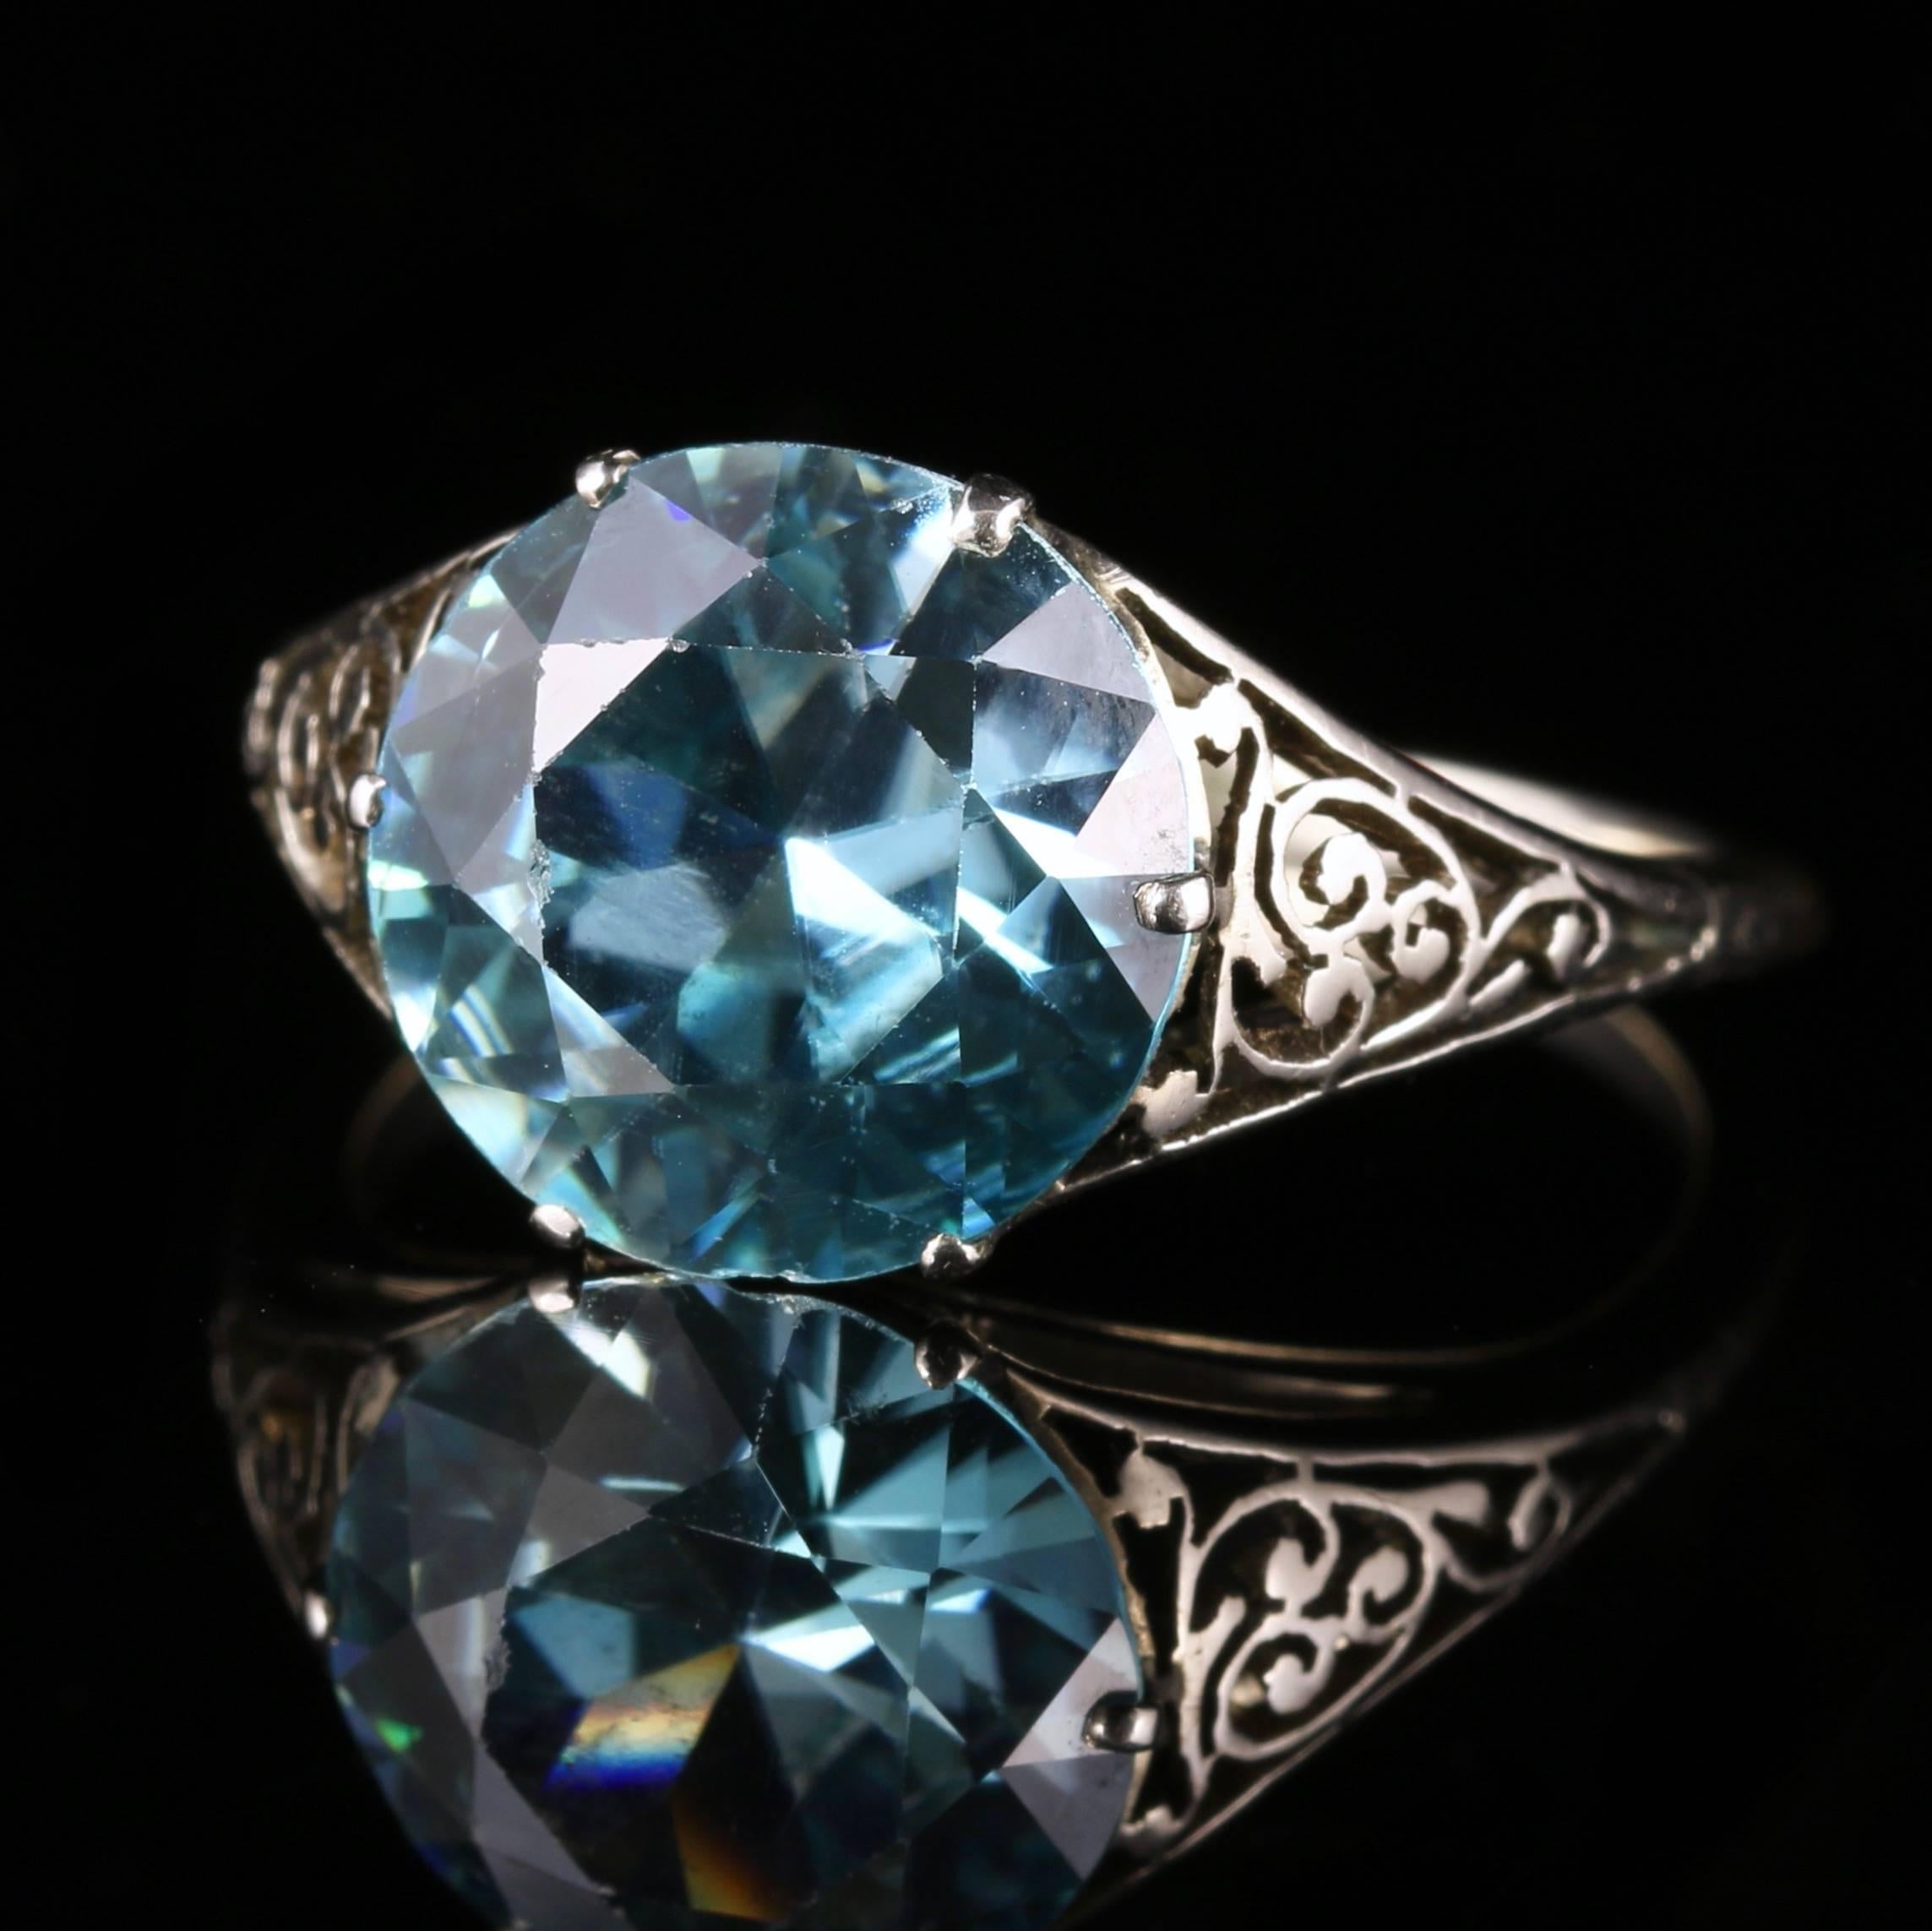 For more details please click continue reading down below...

This fabulous Edwardian ring boasts a 4ct Blue Zircon all set in Platinum Circa 1915

Beautiful ornate shoulder decoration in Platinum also compliments the ring.

Blue Zircon is the birth